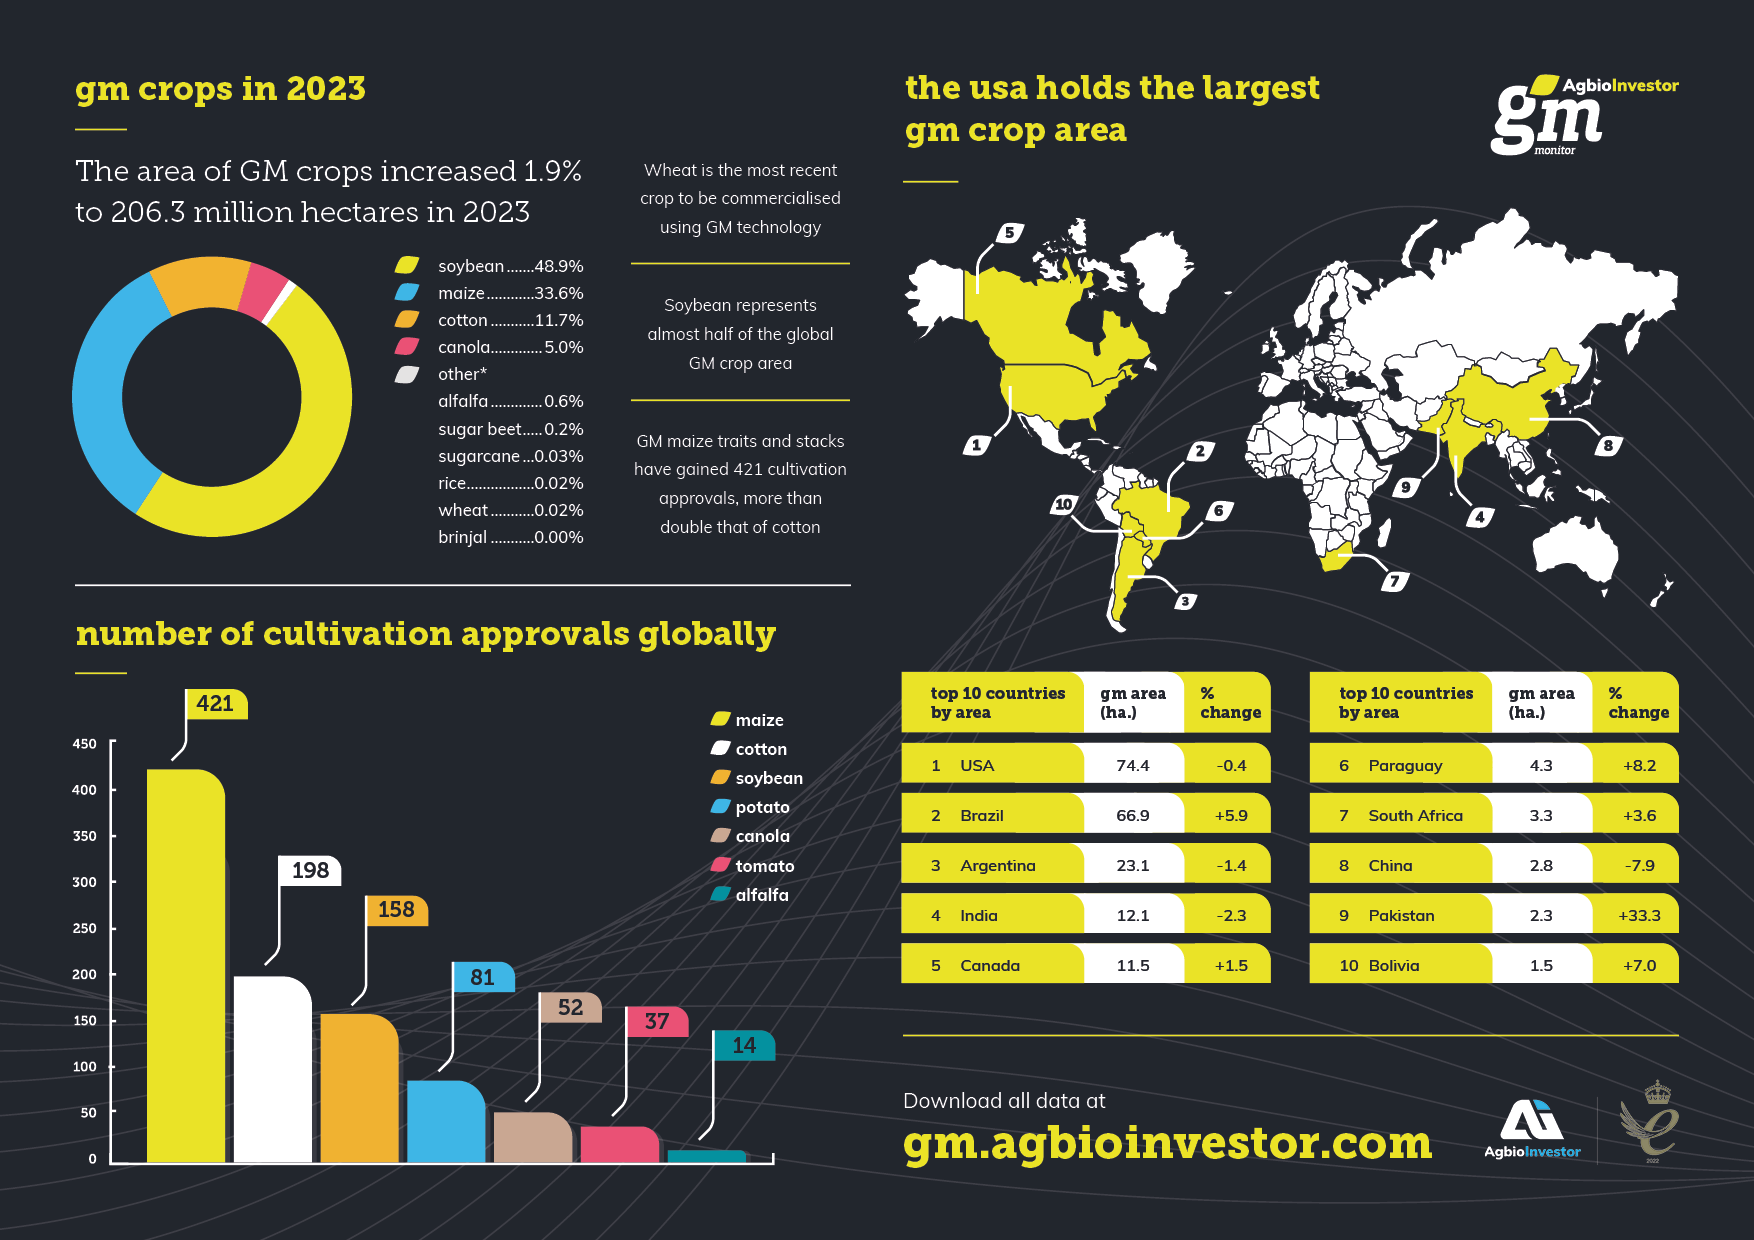 Bar chart showing number of cultivation approvals globally